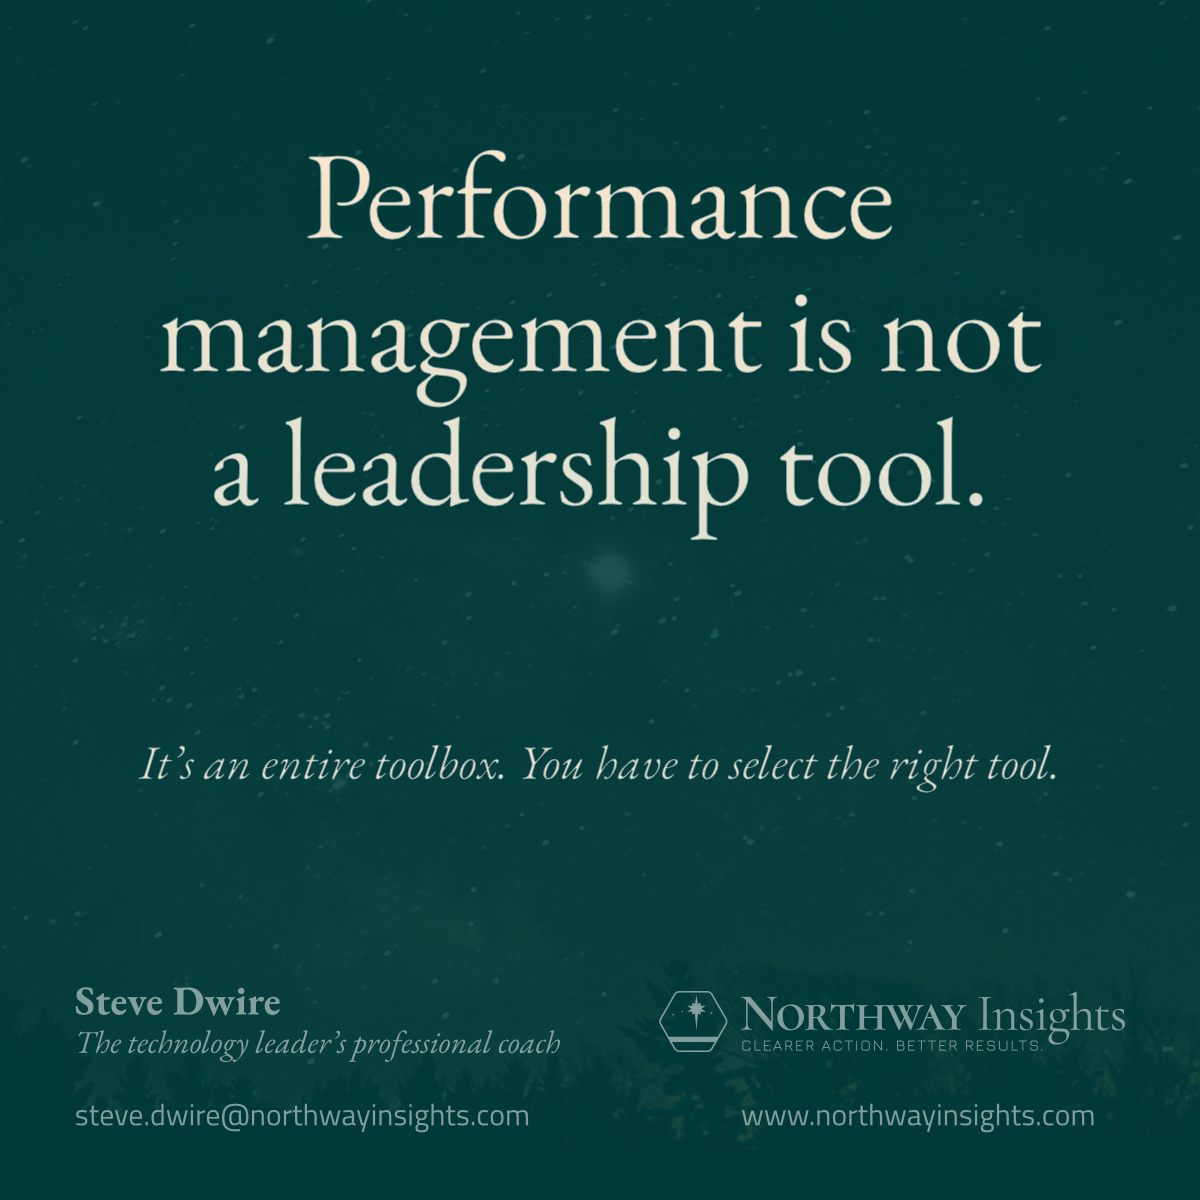 Performance management is not a leadership tool